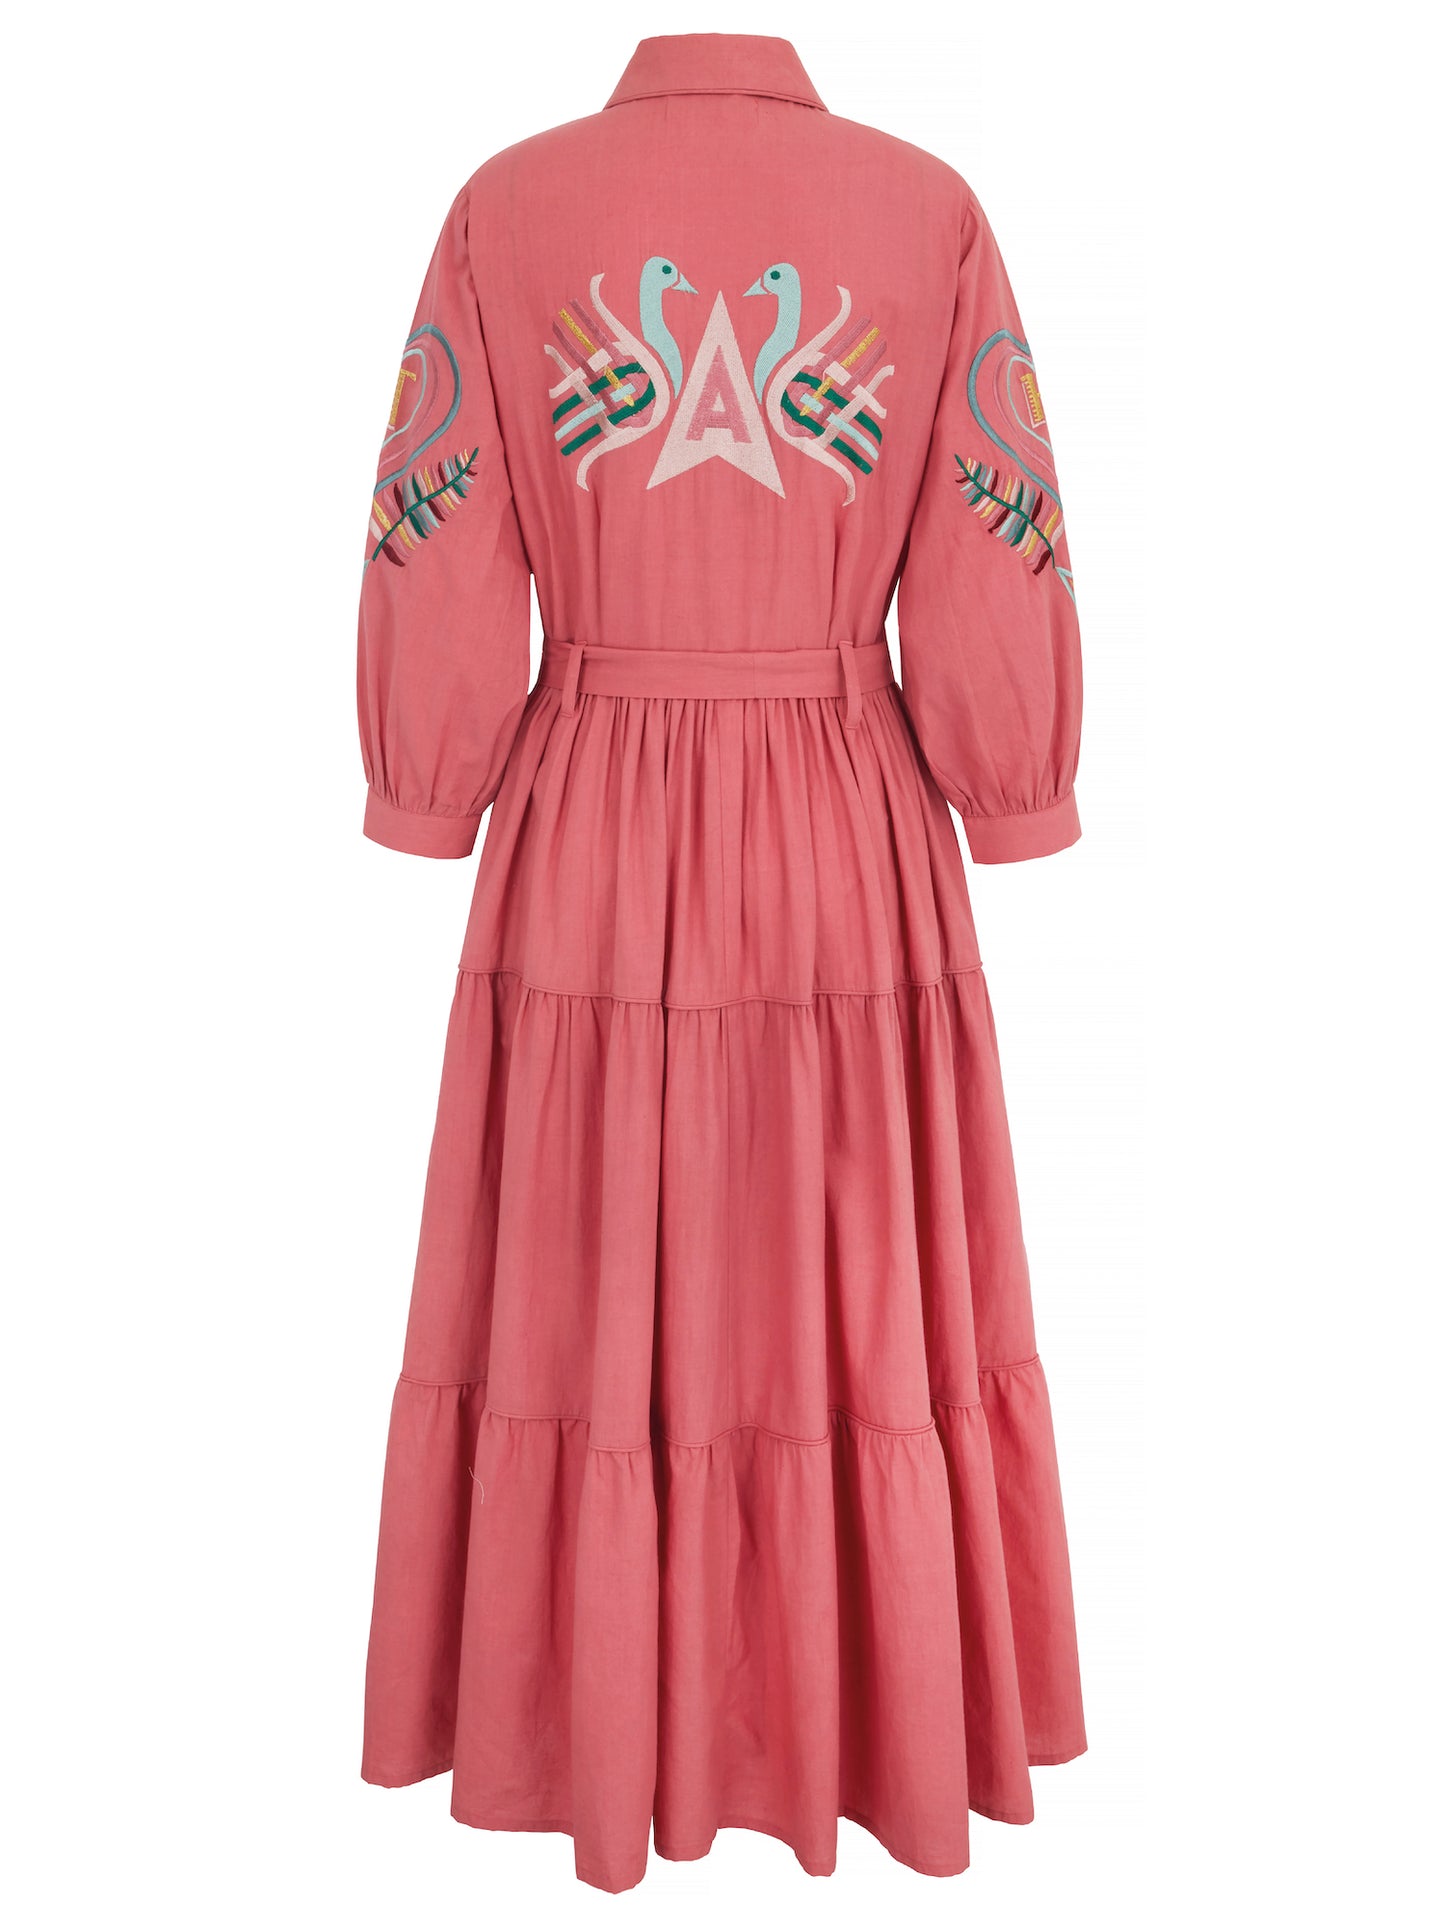 Zip Front Dress Pink Embroidered